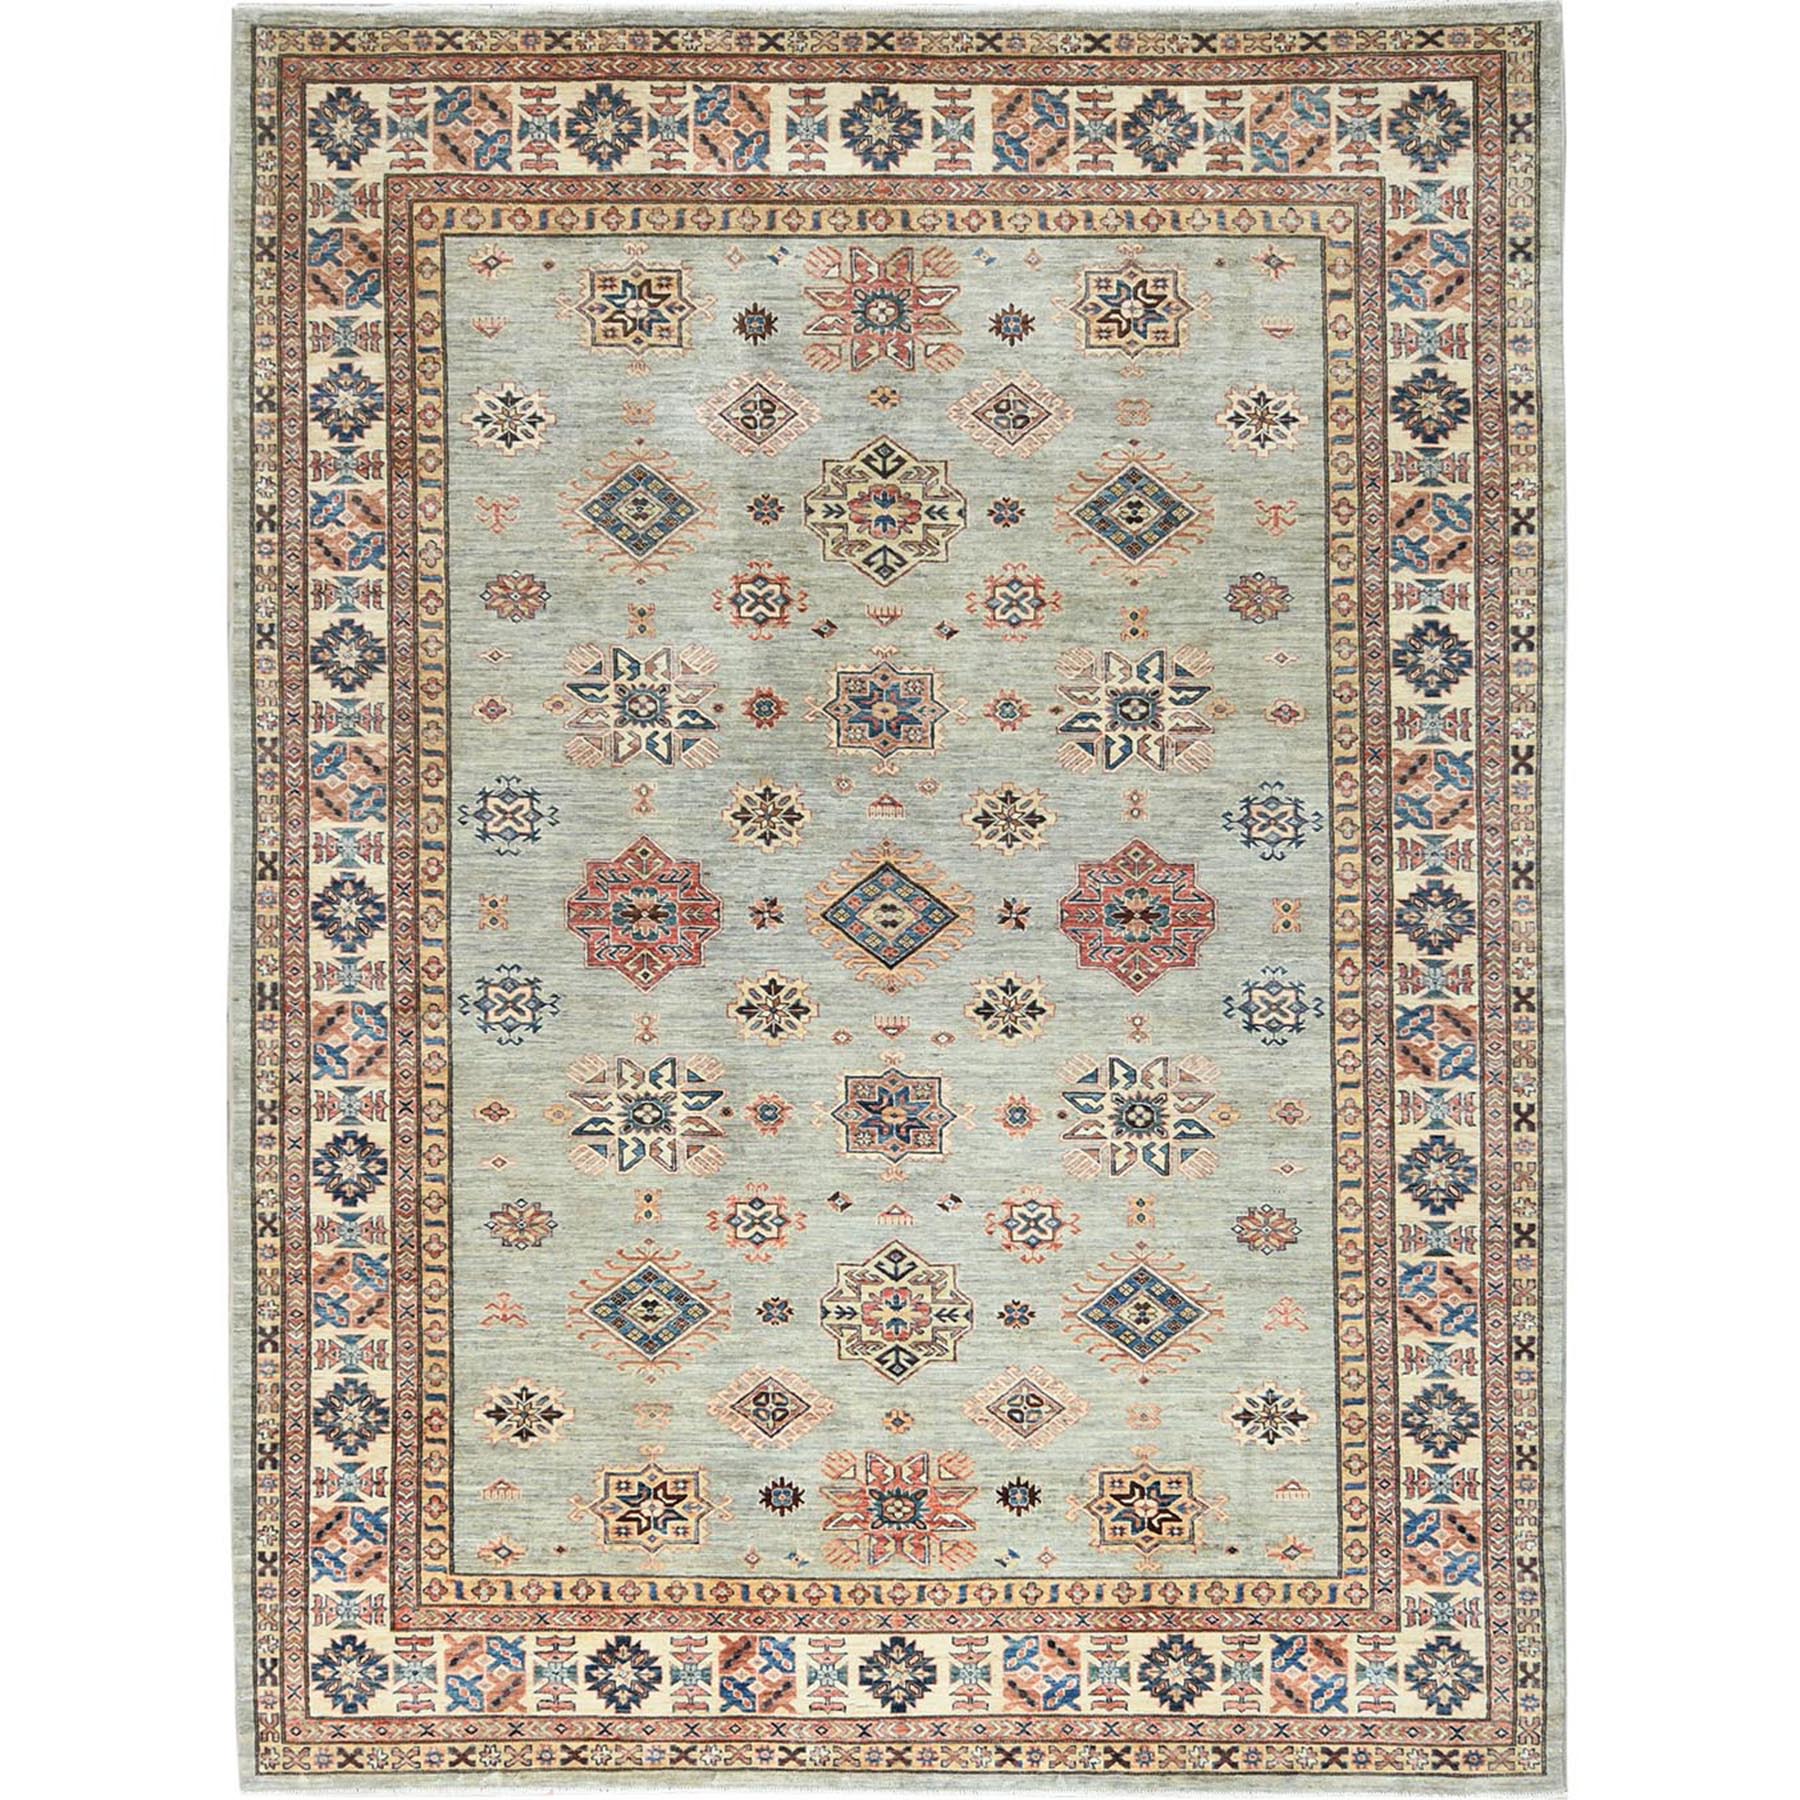  Wool Hand-Knotted Area Rug 8'8